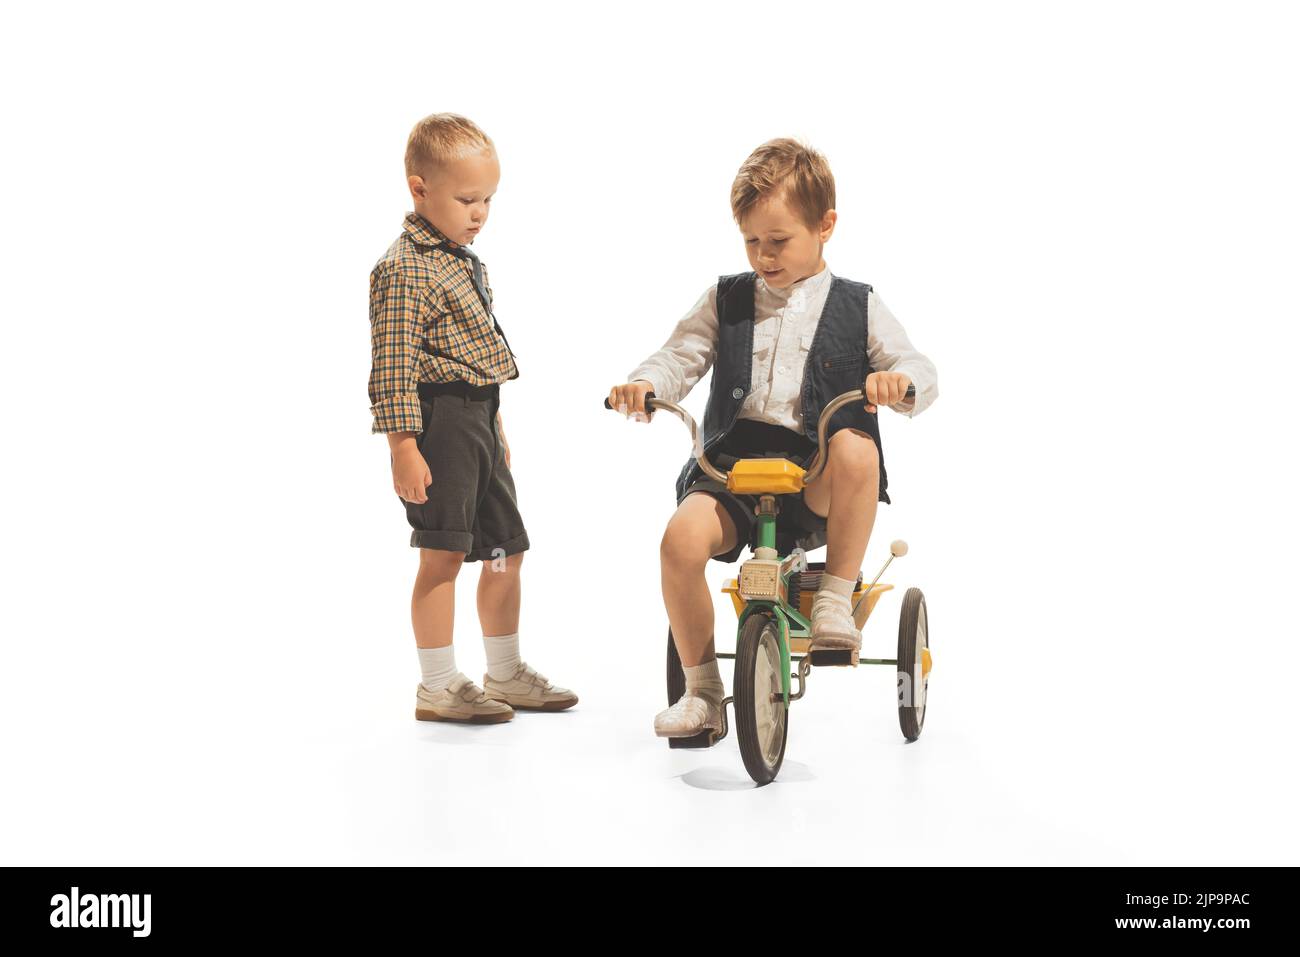 Portrait of children, boys in vintage outfits playing together, having fun, riding small bike isolated over white background Stock Photo